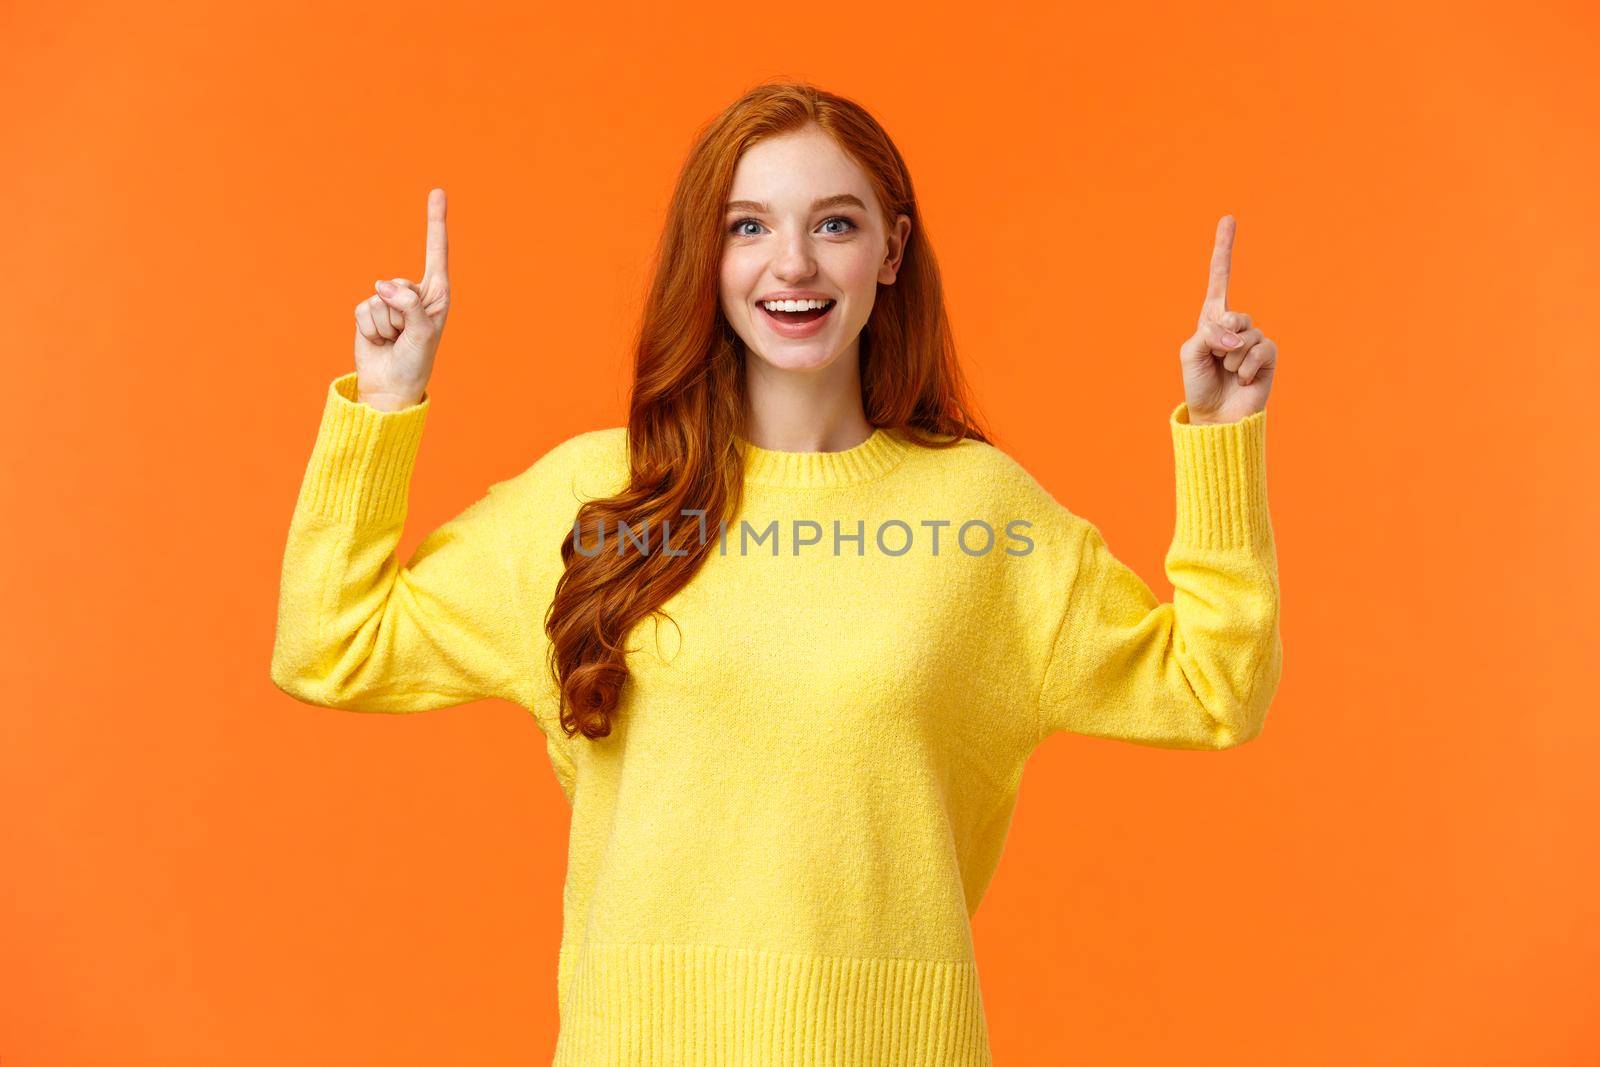 Excited, tender good-looking redhead girl with freckles, wear yellow sweater, pointing up and smiling joyfully, telling about promotion, advertising top product, orange background.